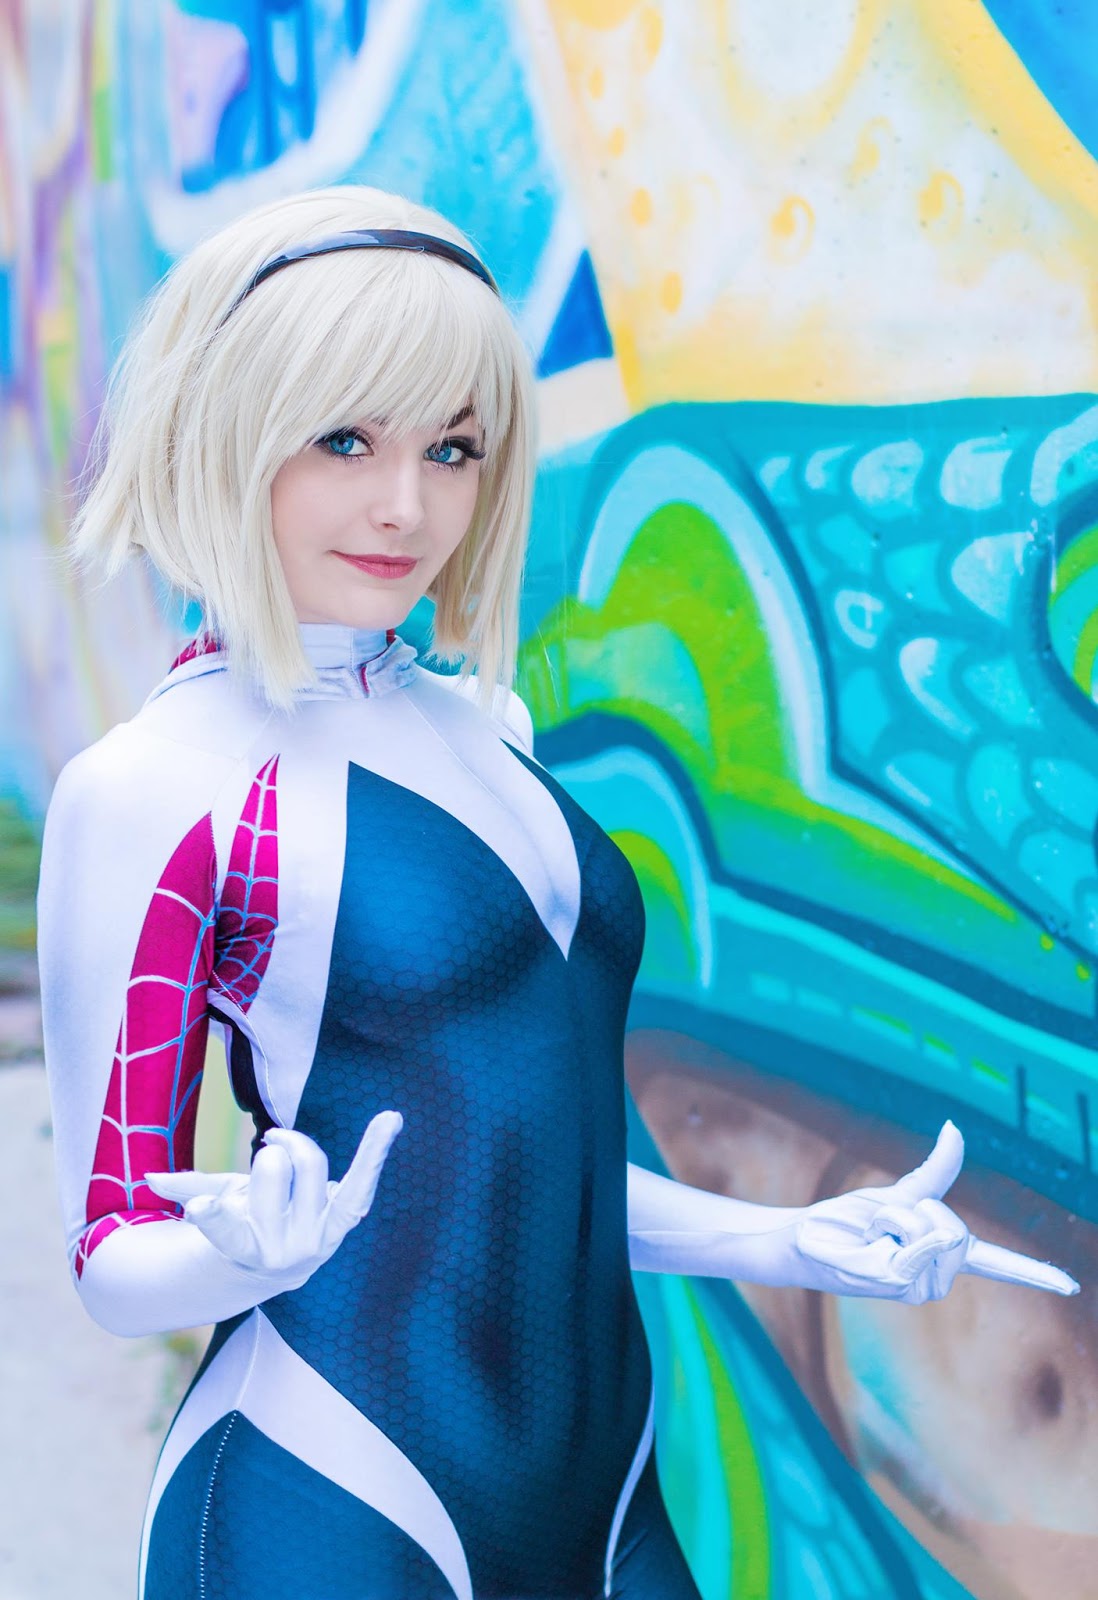 Stacy cosplay. Гвен Стейси. Спайдер Гвен косплей. Гвен Стейси косплей. Spider Gwen косплей.